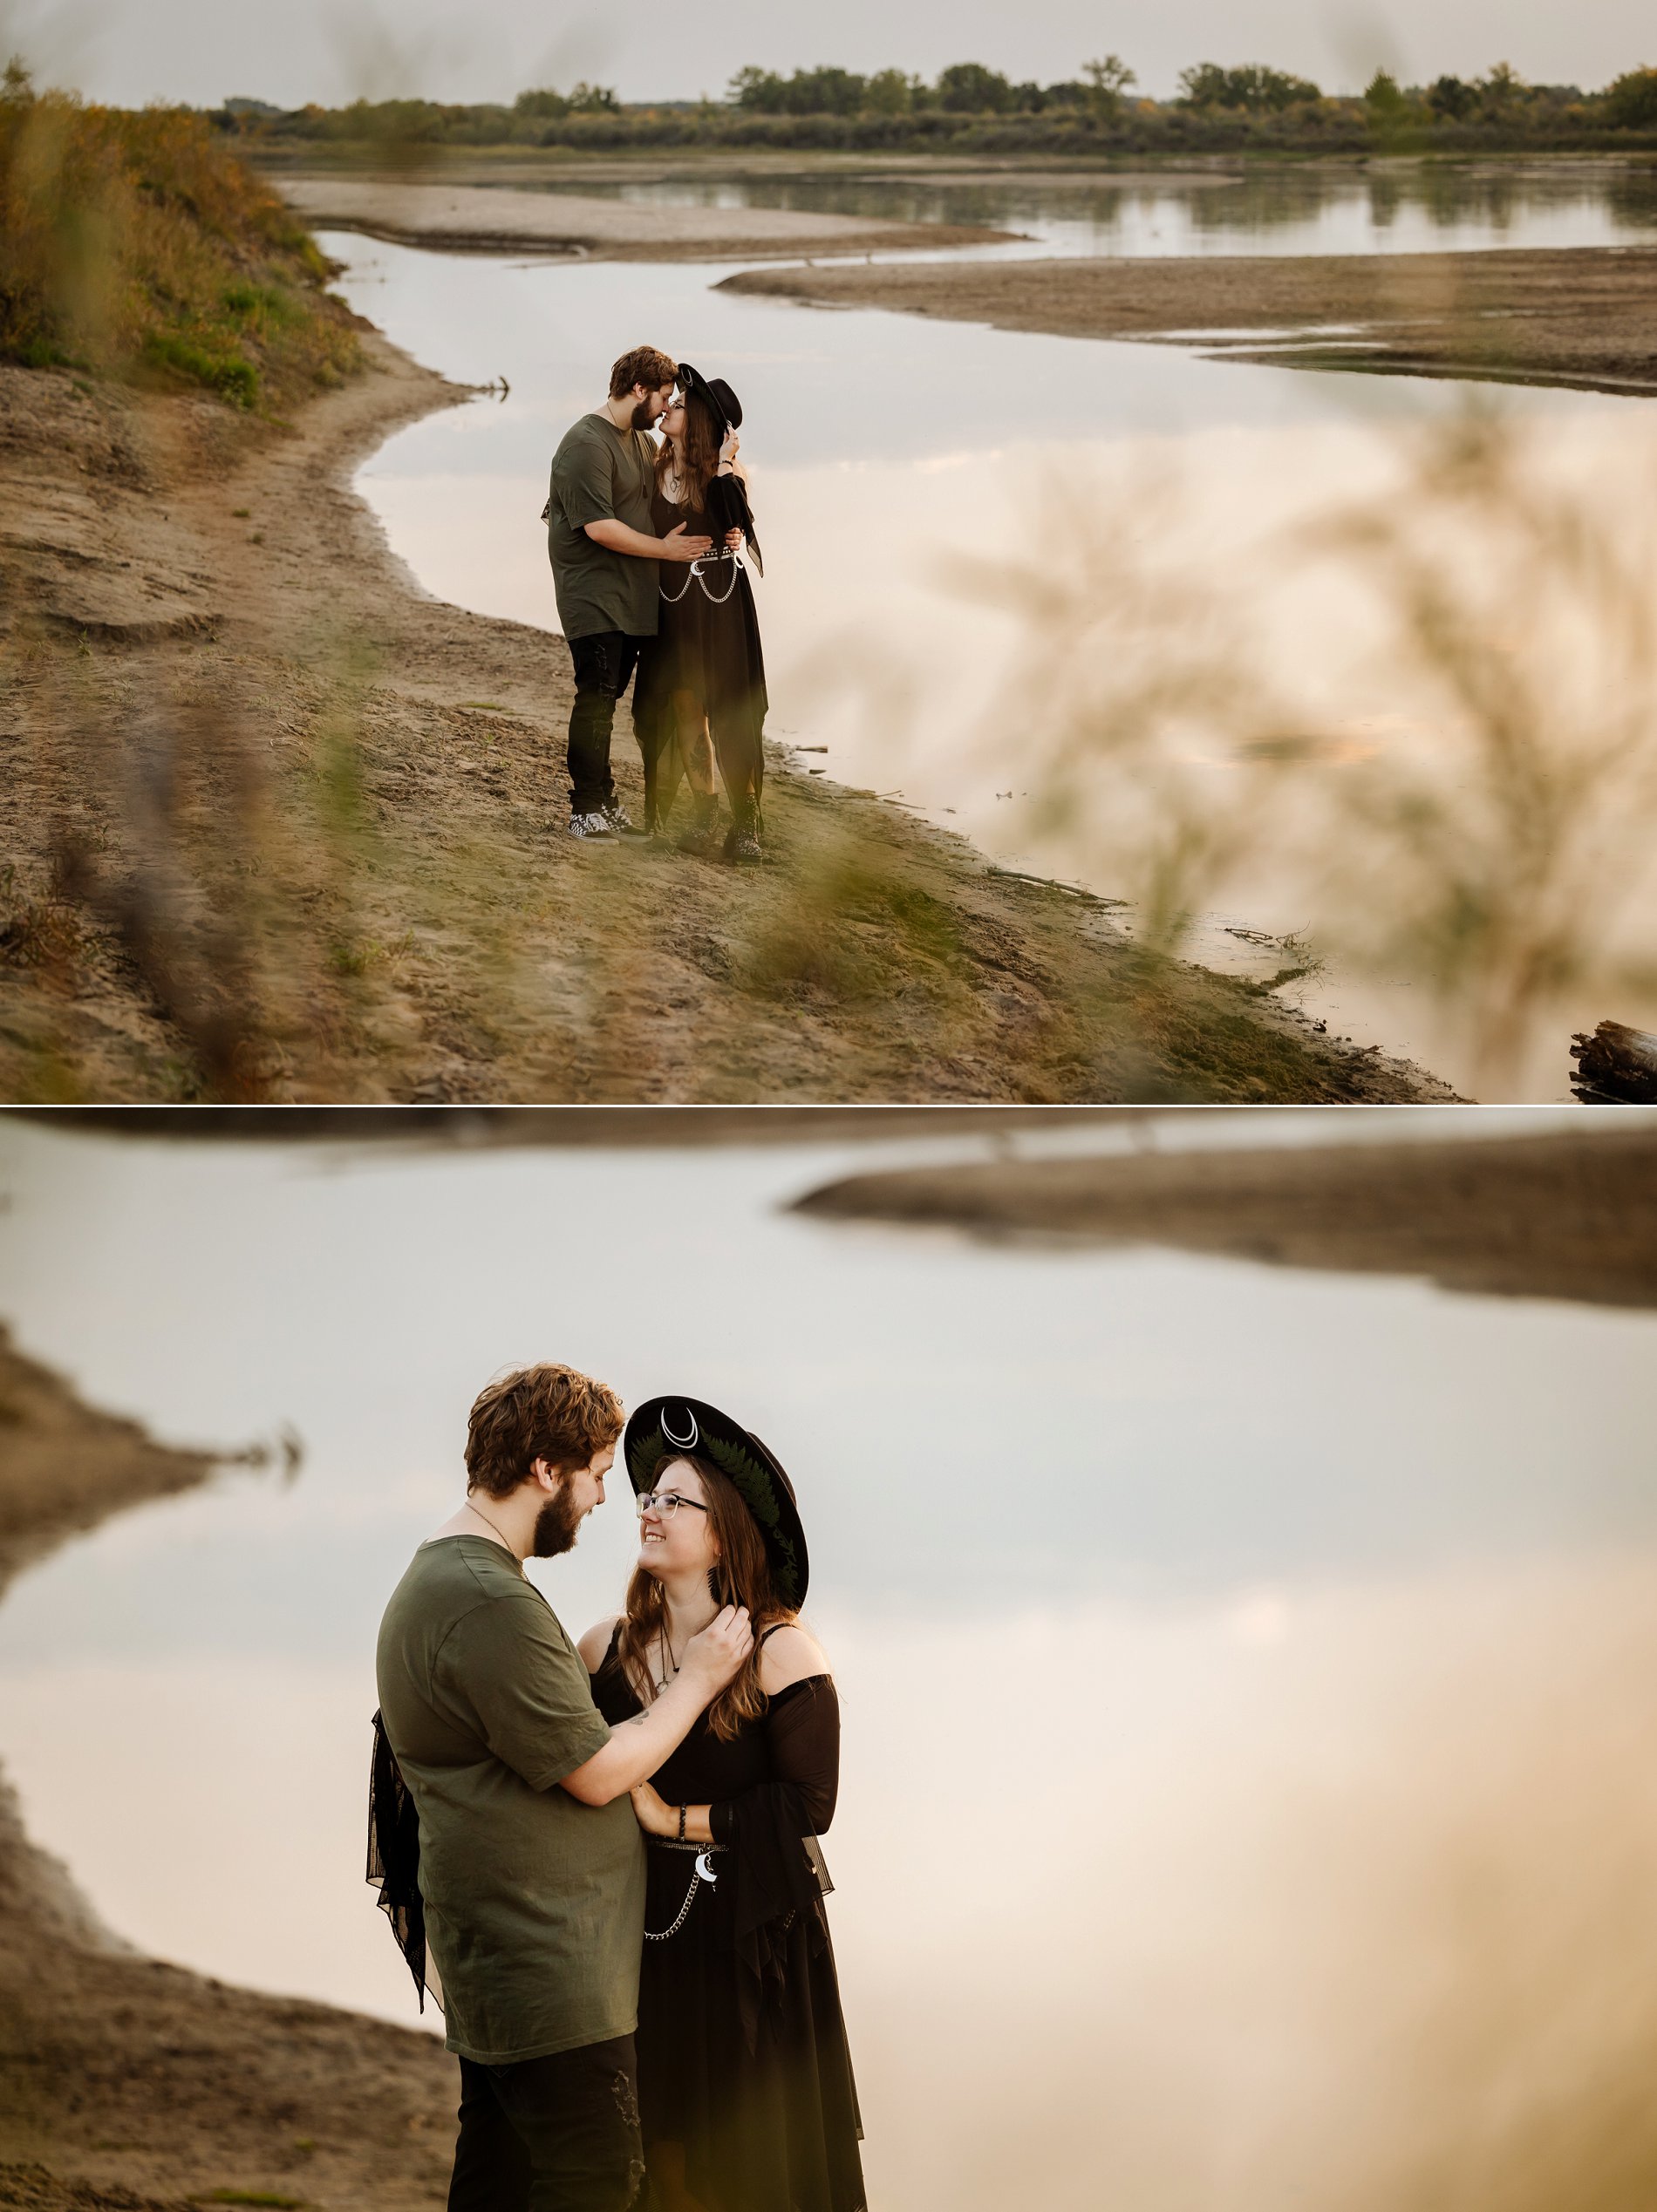 Golden hour engagement photos by the river at Chief Whitecap Park in Saskatoon